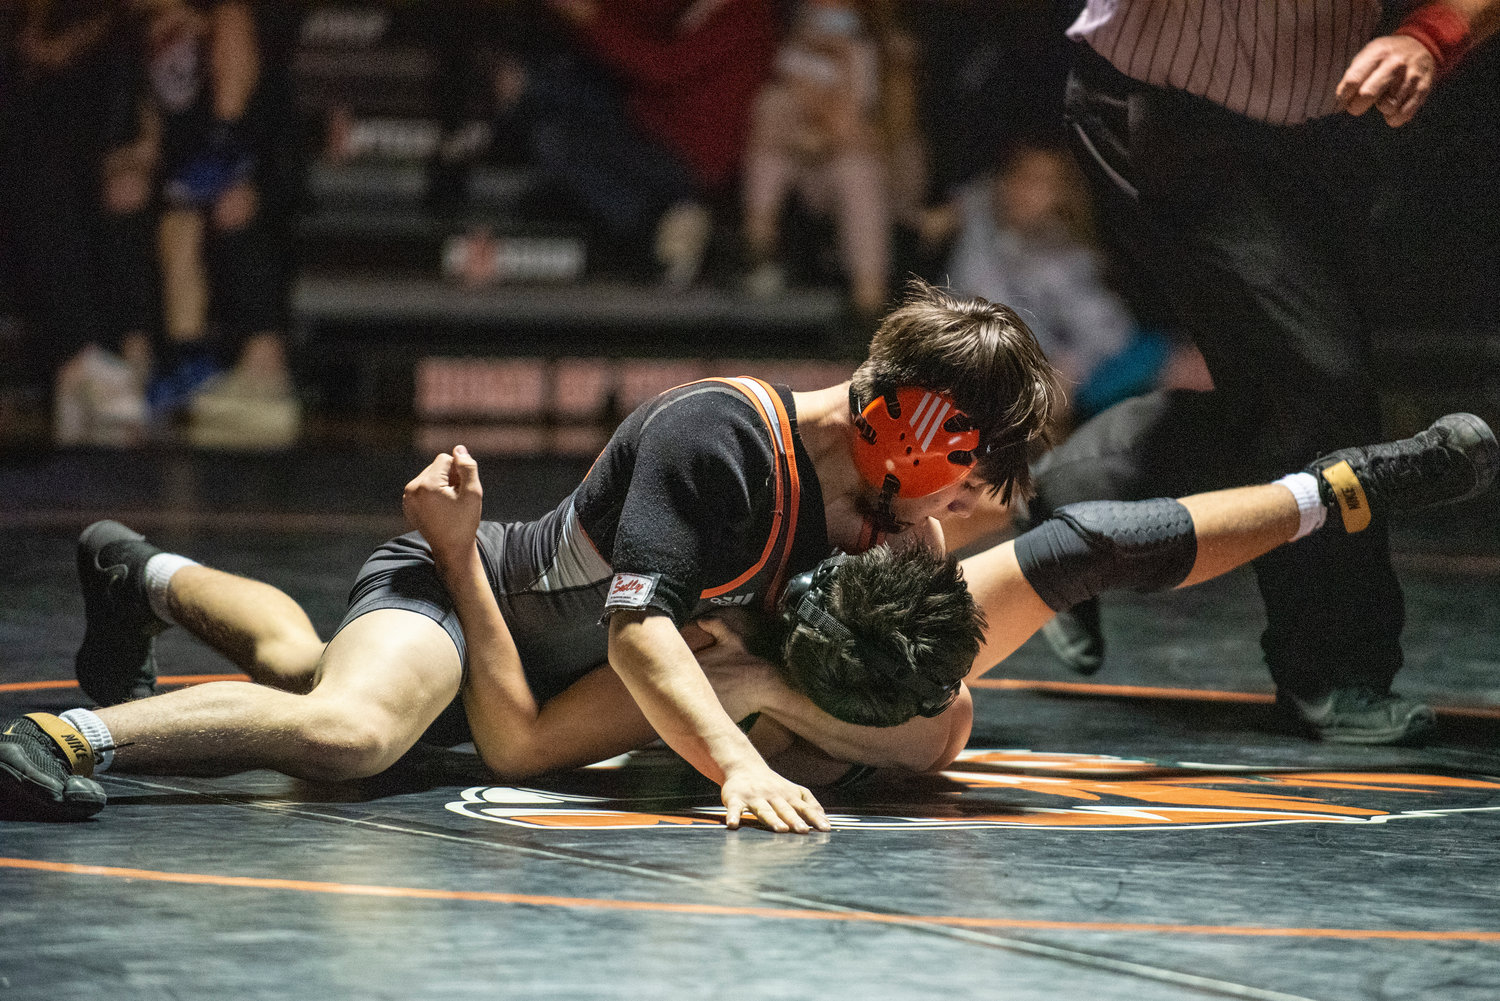 Centralia sophomore Antonio Campos, top, pins a Tumwater wrestler at 120 pounds during a dual match at home on Jan. 5.